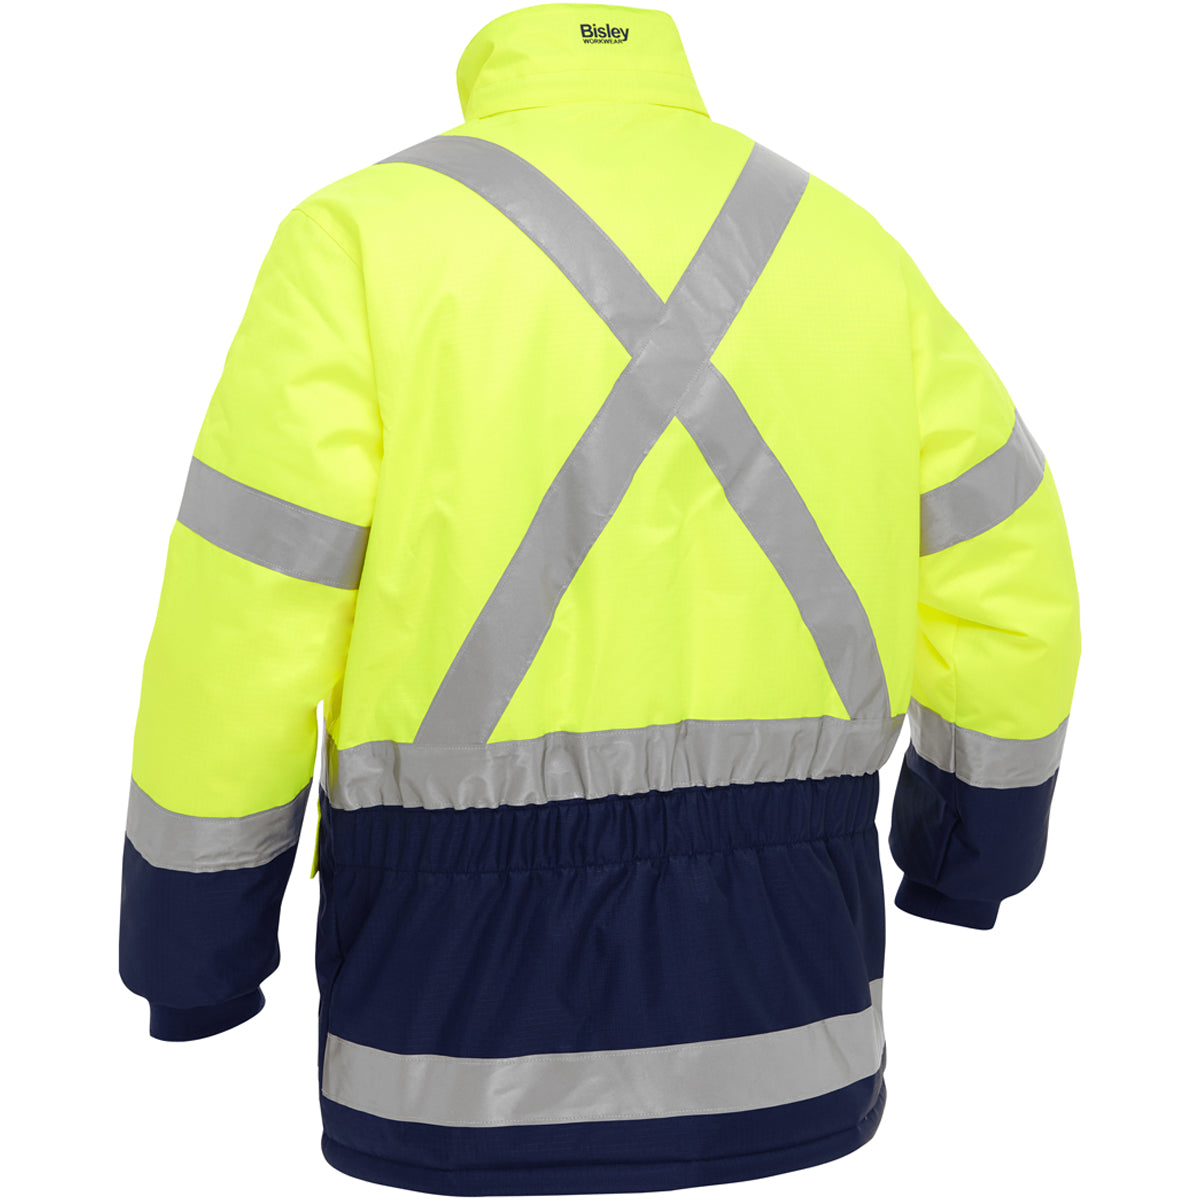 These Bisley® Extreme Cold Hi-Vis Yellow ANSI 107 Class R3 Industrial Work Jackets with hood removed are engineered with high-performance bio-based recycled materials to provide advanced thermal protection against extreme cold climate hazards while diverting plastic water bottles from landfill. 